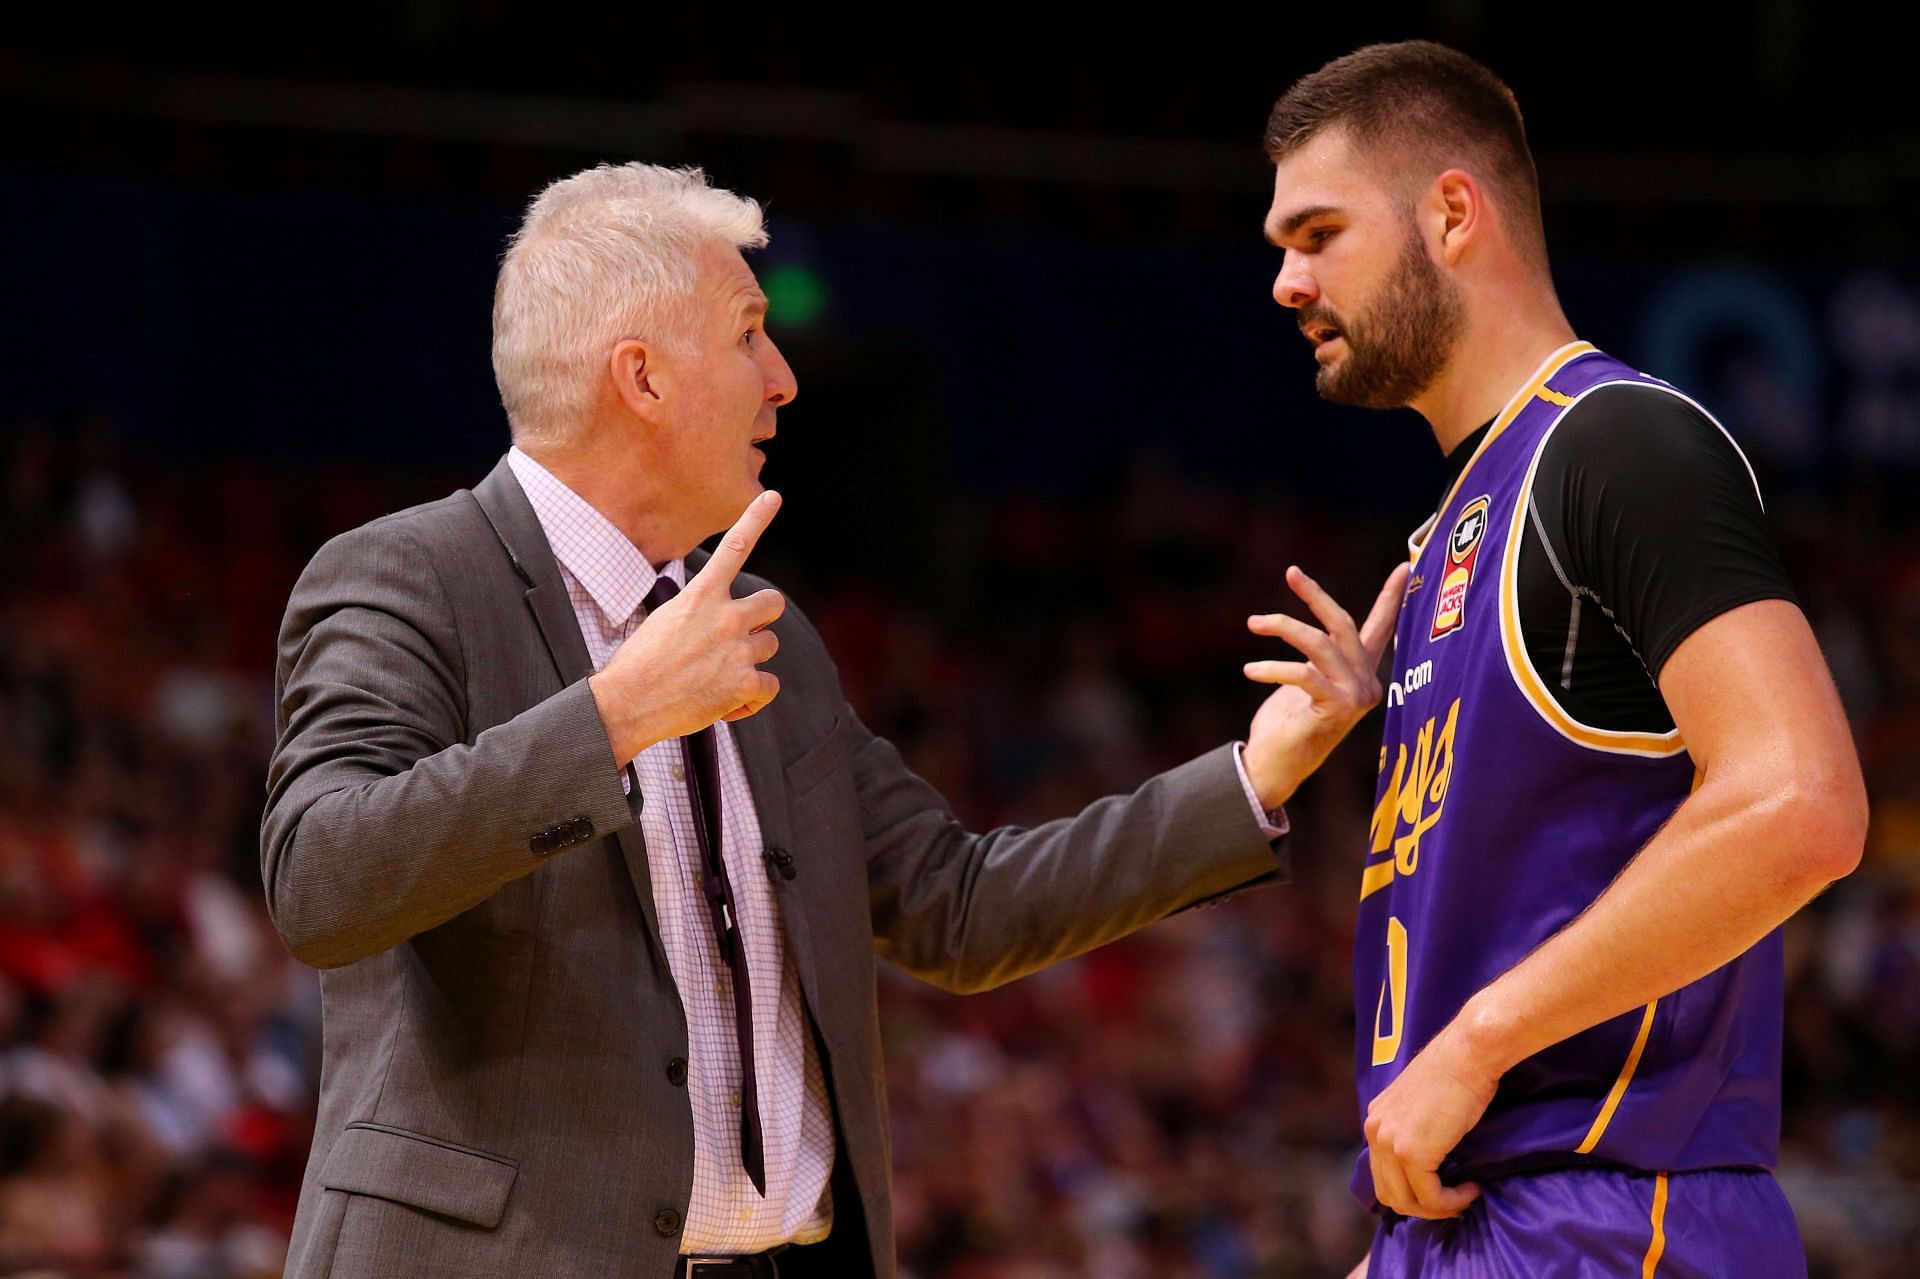 The Sydney Kings were Isaac Humphries&#039; first professional team (Image via Getty Images)